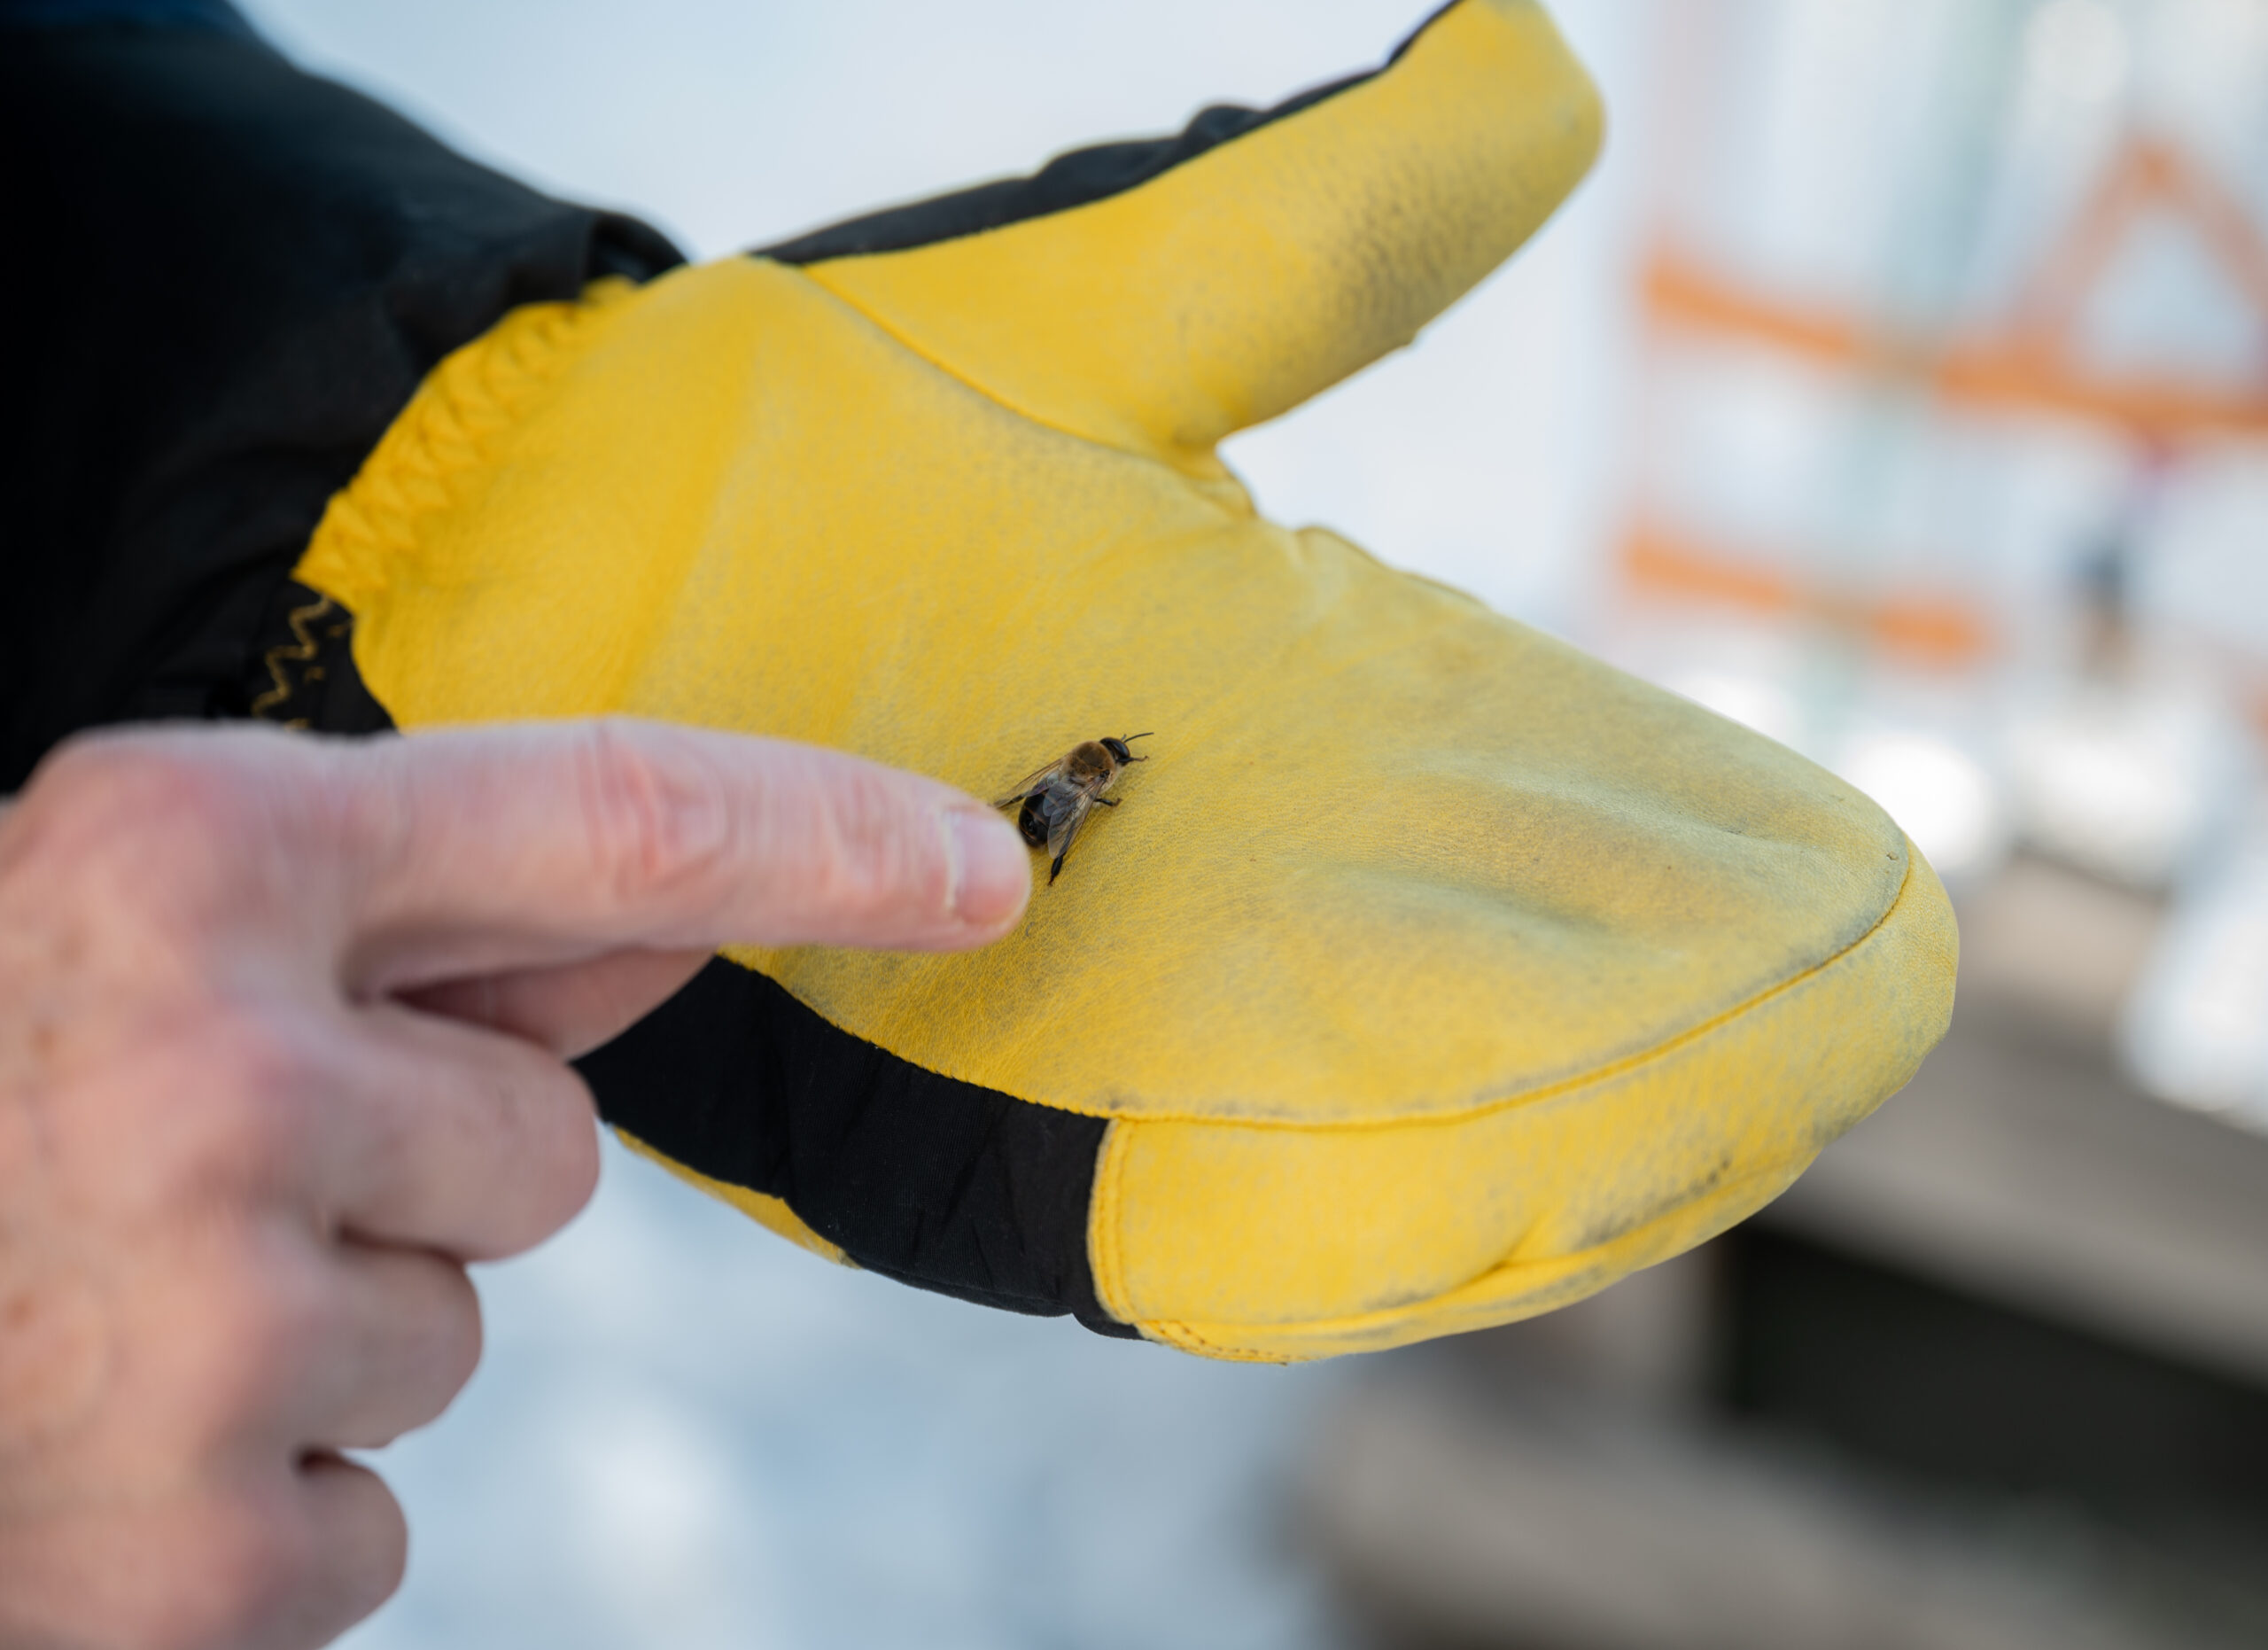 A dead bee on a yellow glove